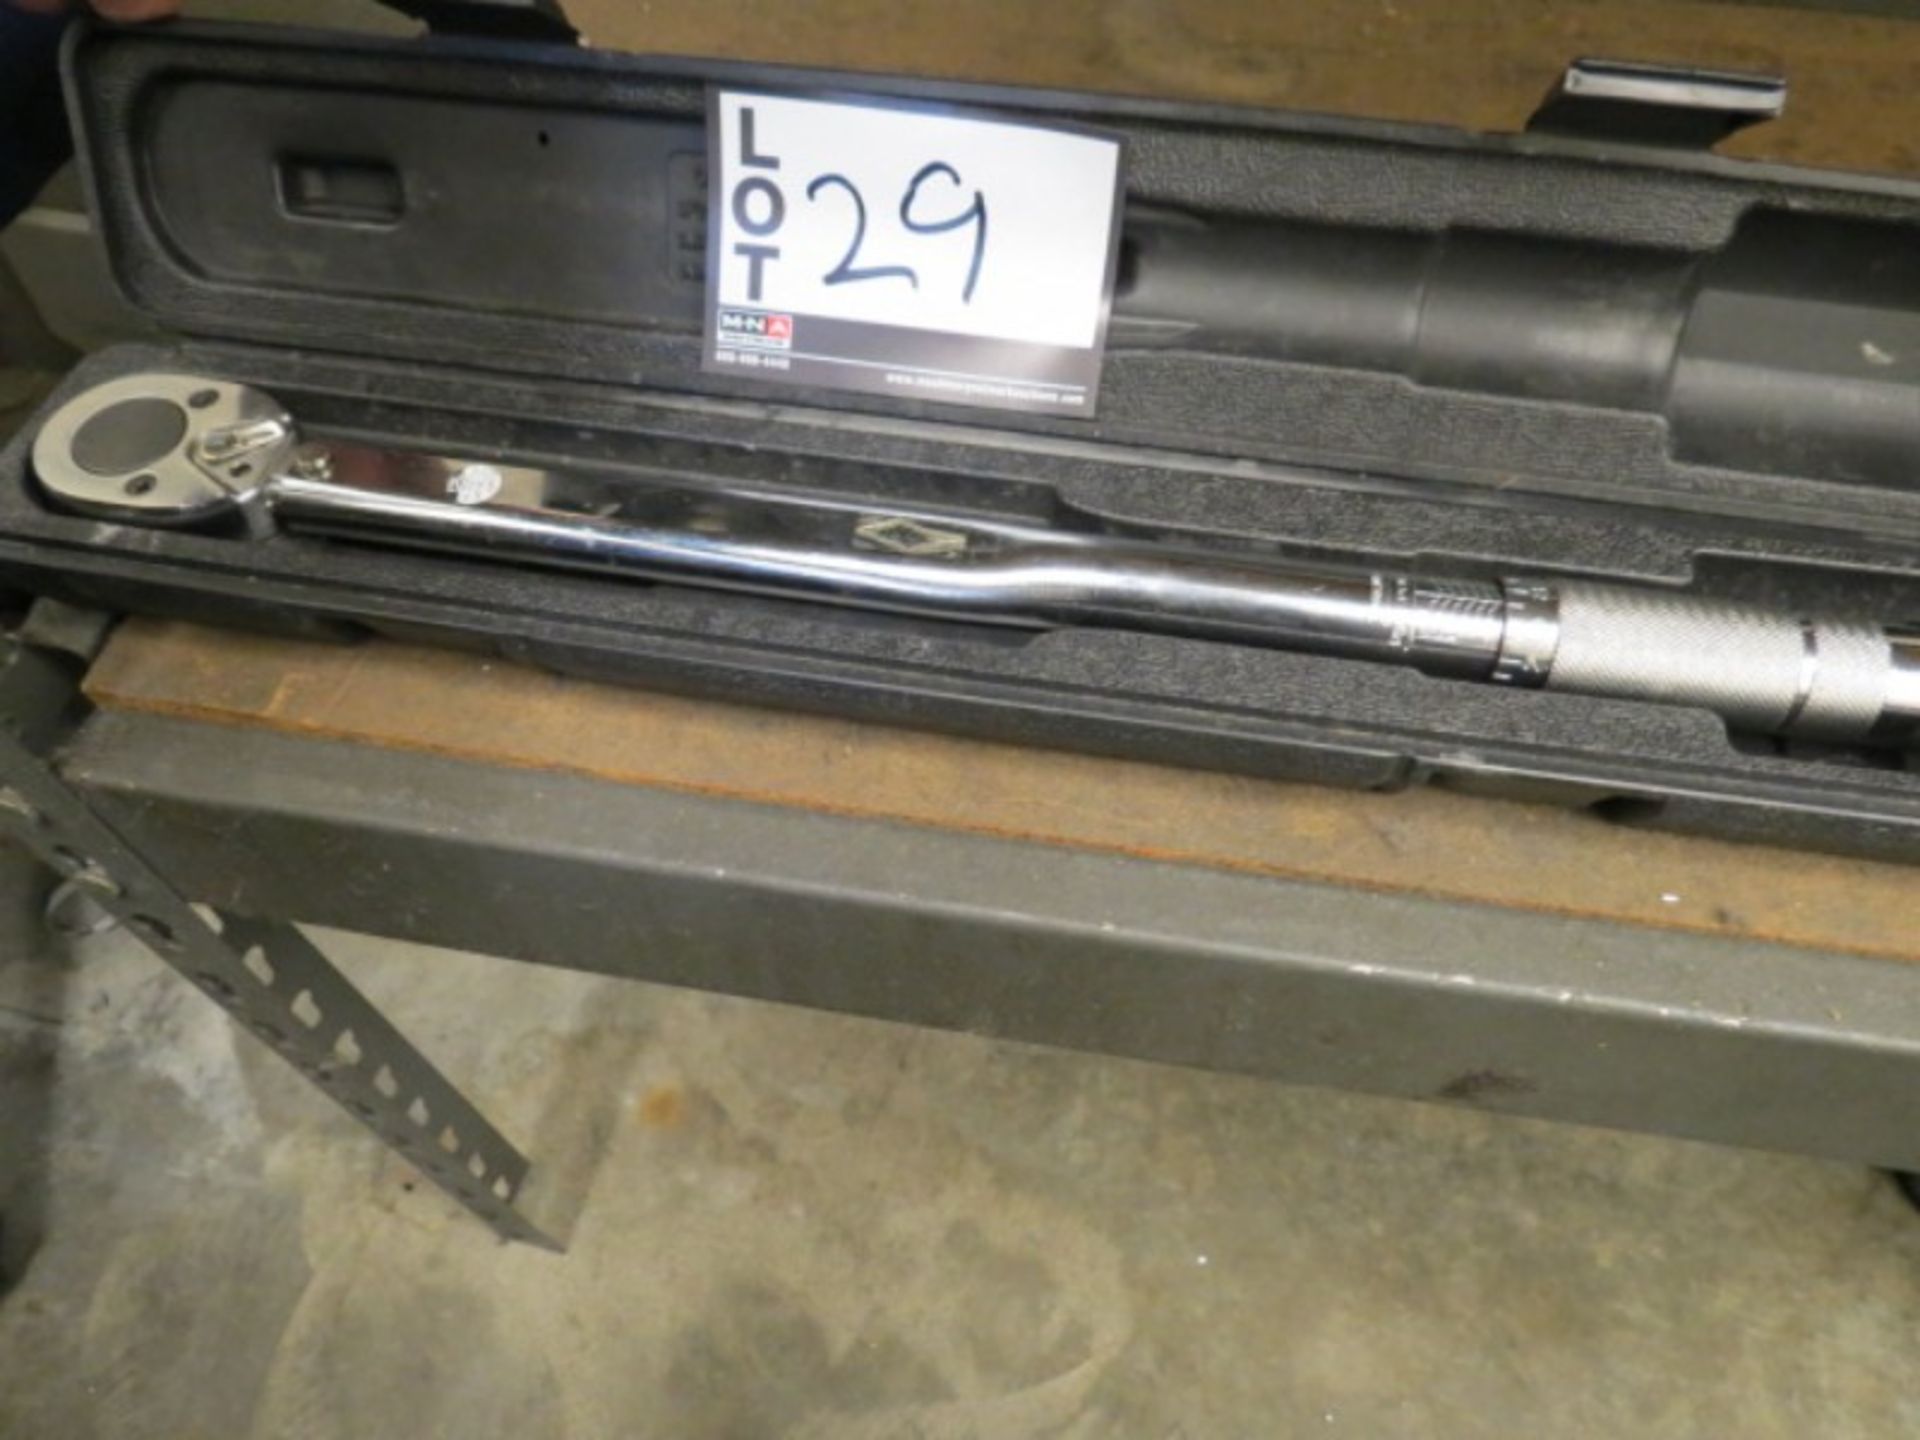 Q Cok Torque Wrench - Image 2 of 3